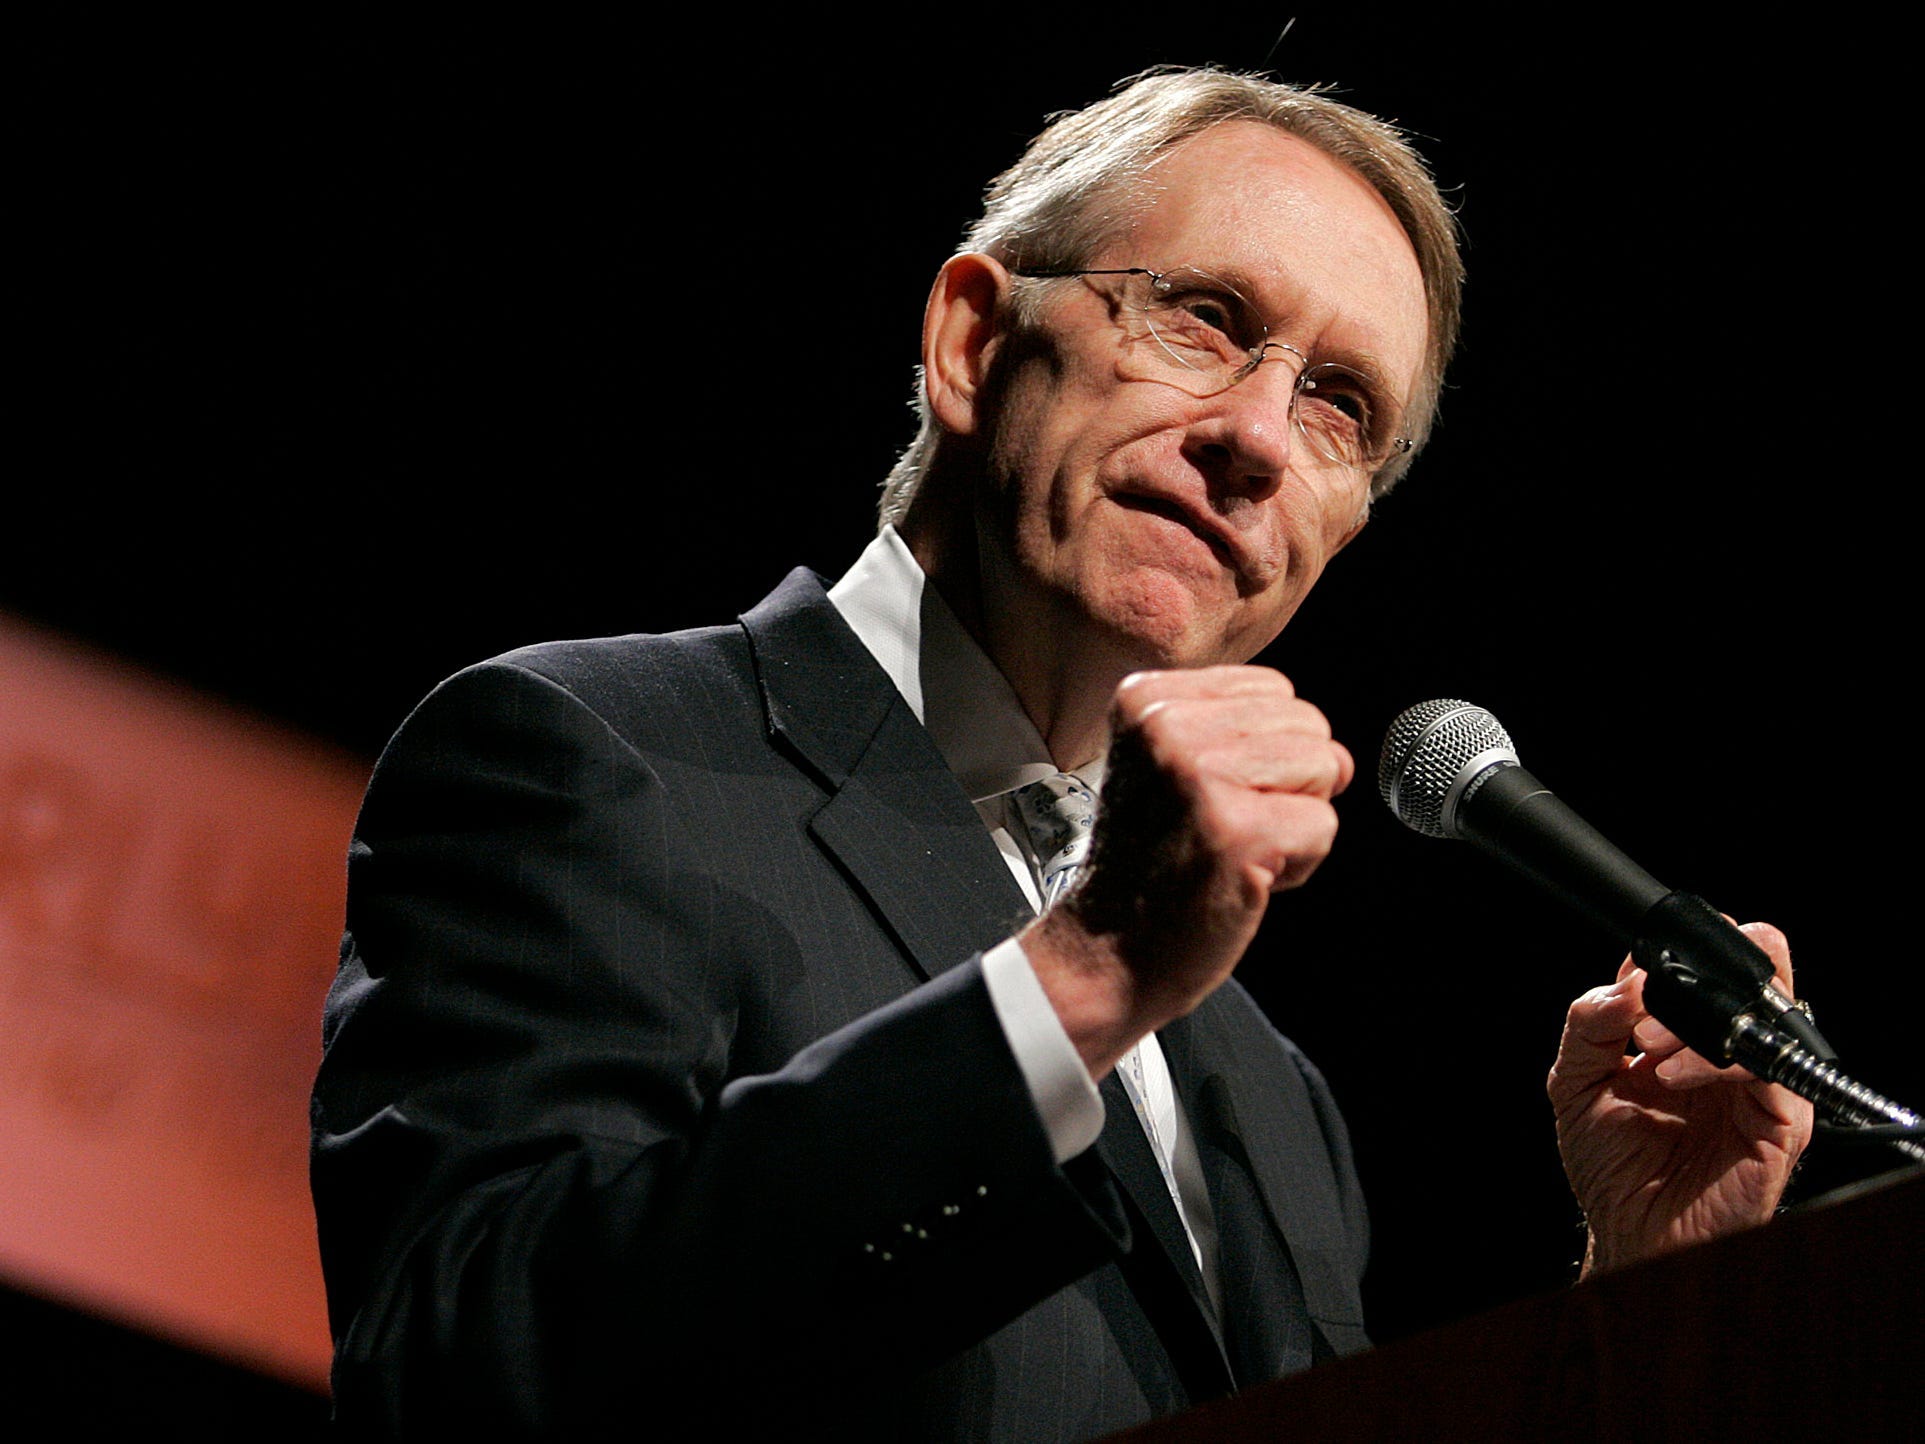 Senate Minority Leader Harry Reid, D-Nev., delivers a speech at the YearlyKos convention in Las Vegas on June 10, 2006.